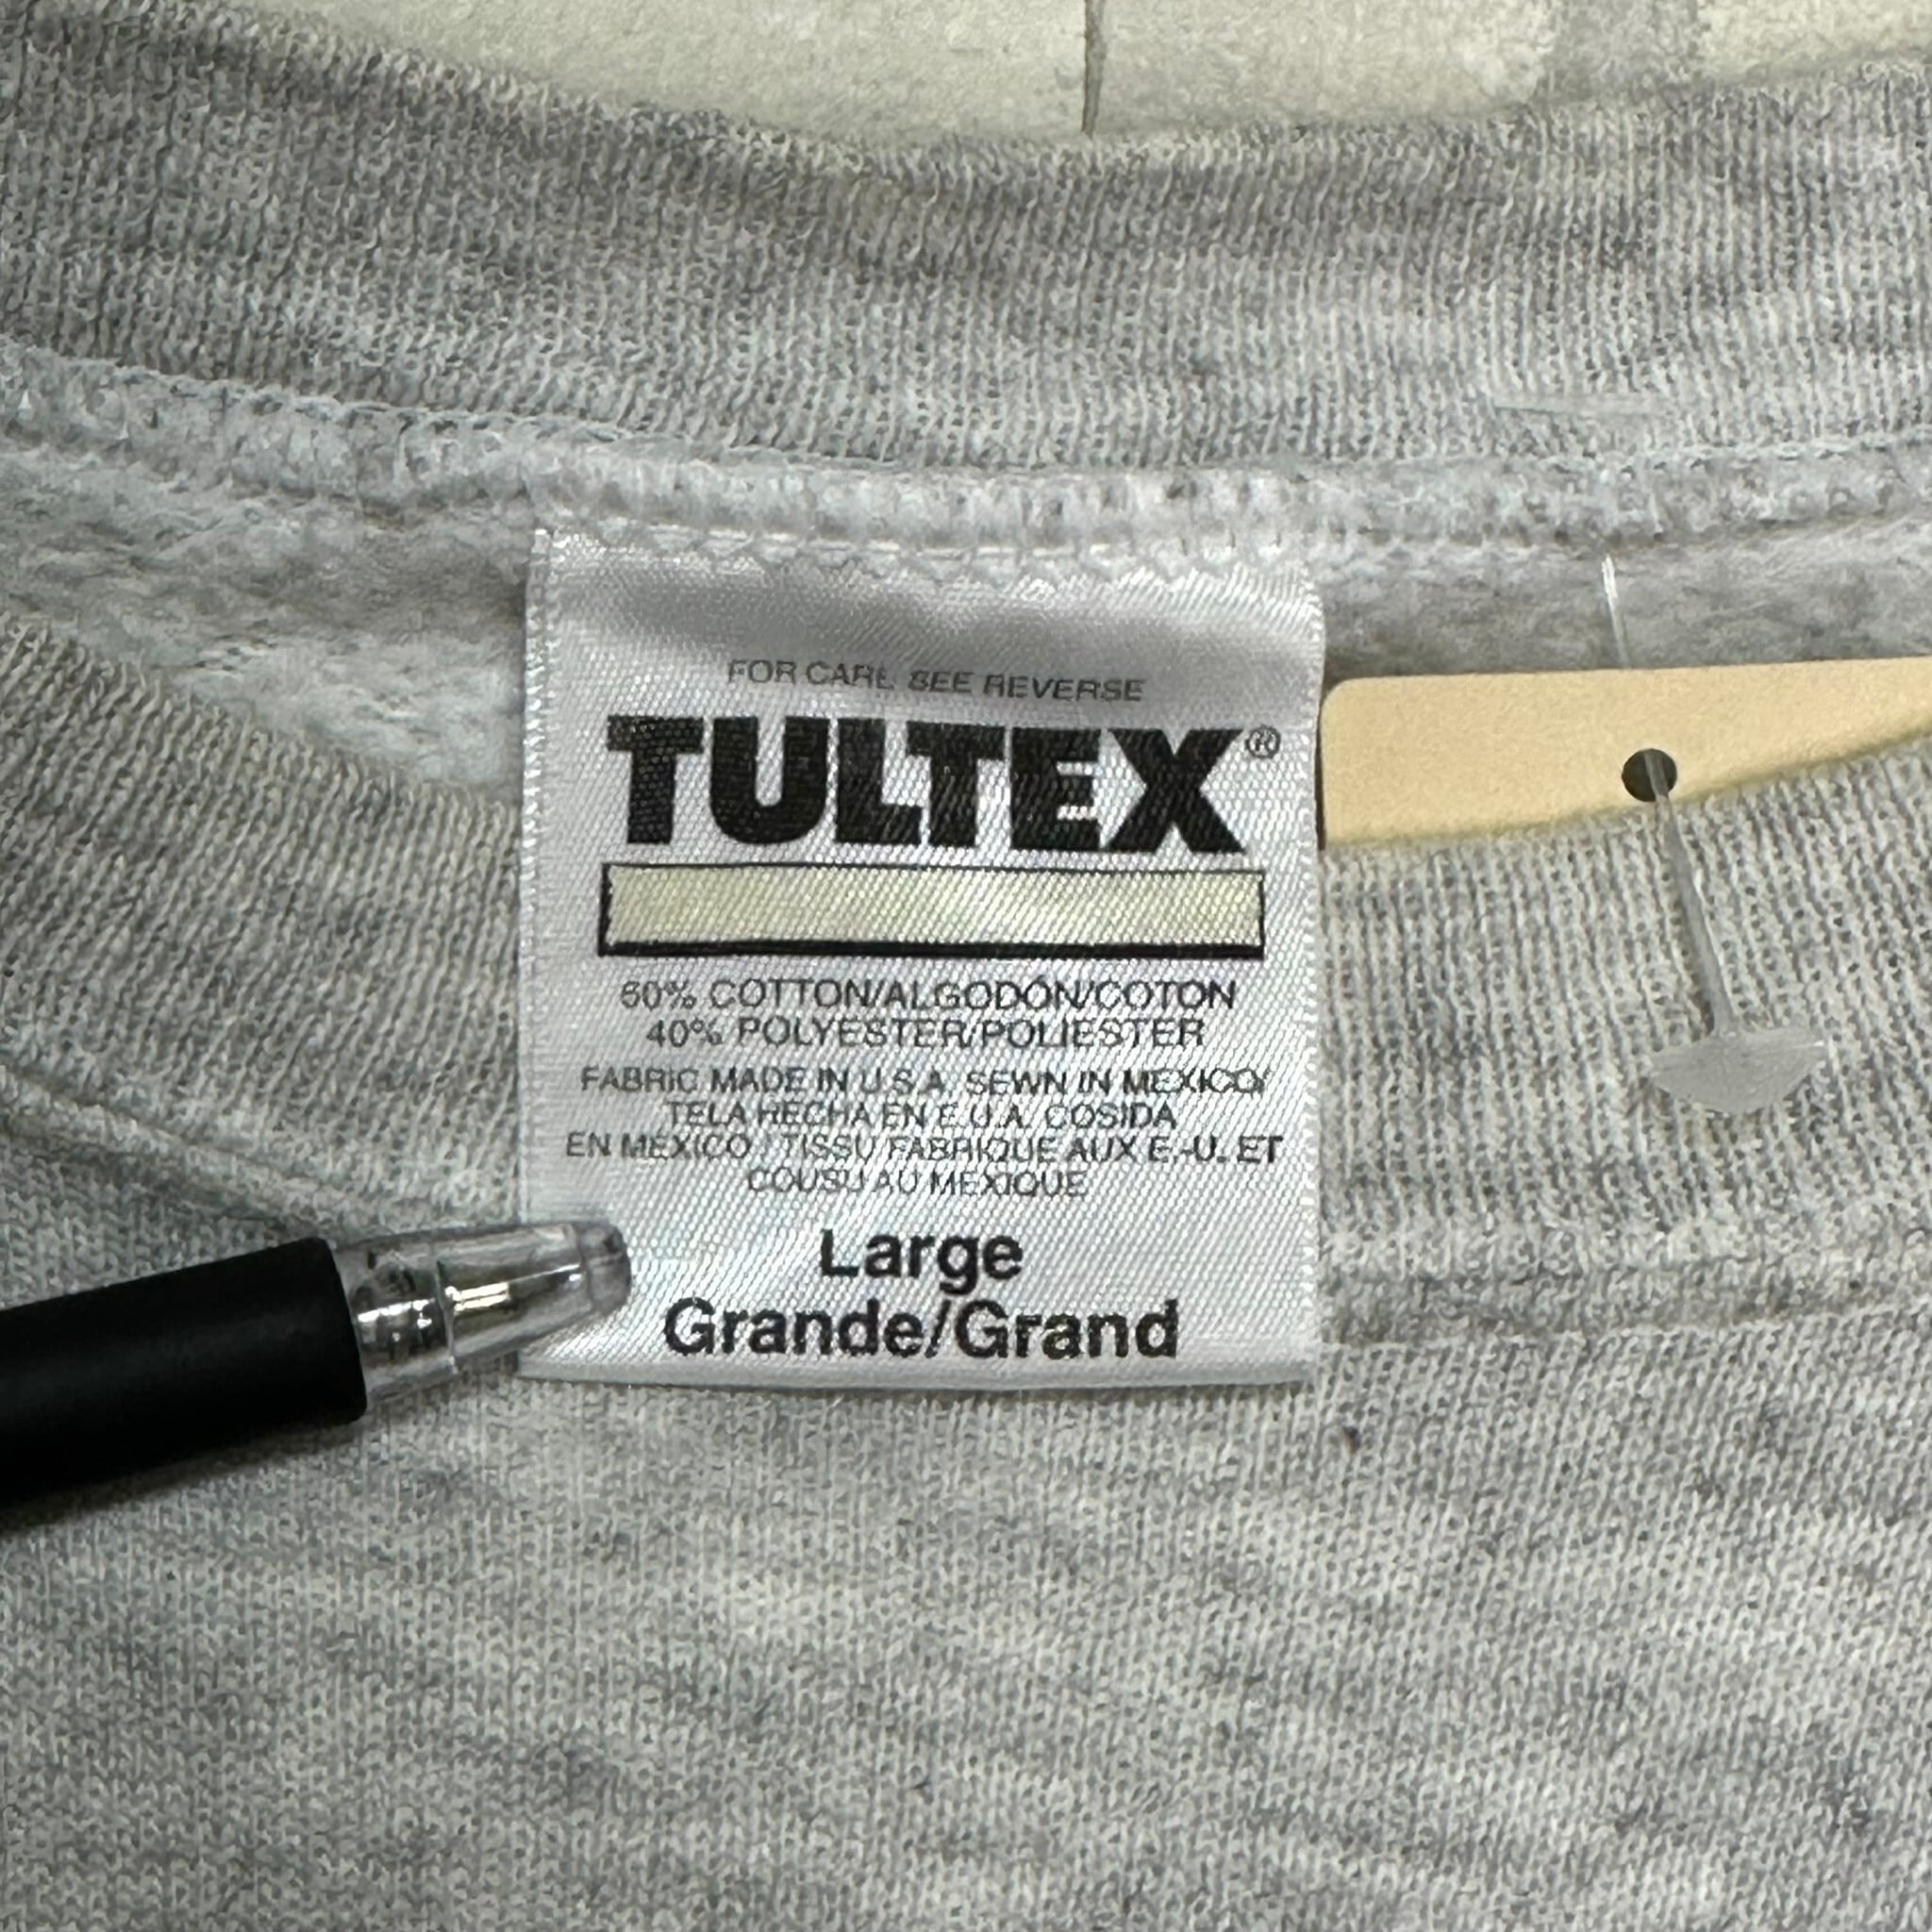 Made in USA】TULTEX スウェット L プリント | 古着屋OLDGREEN